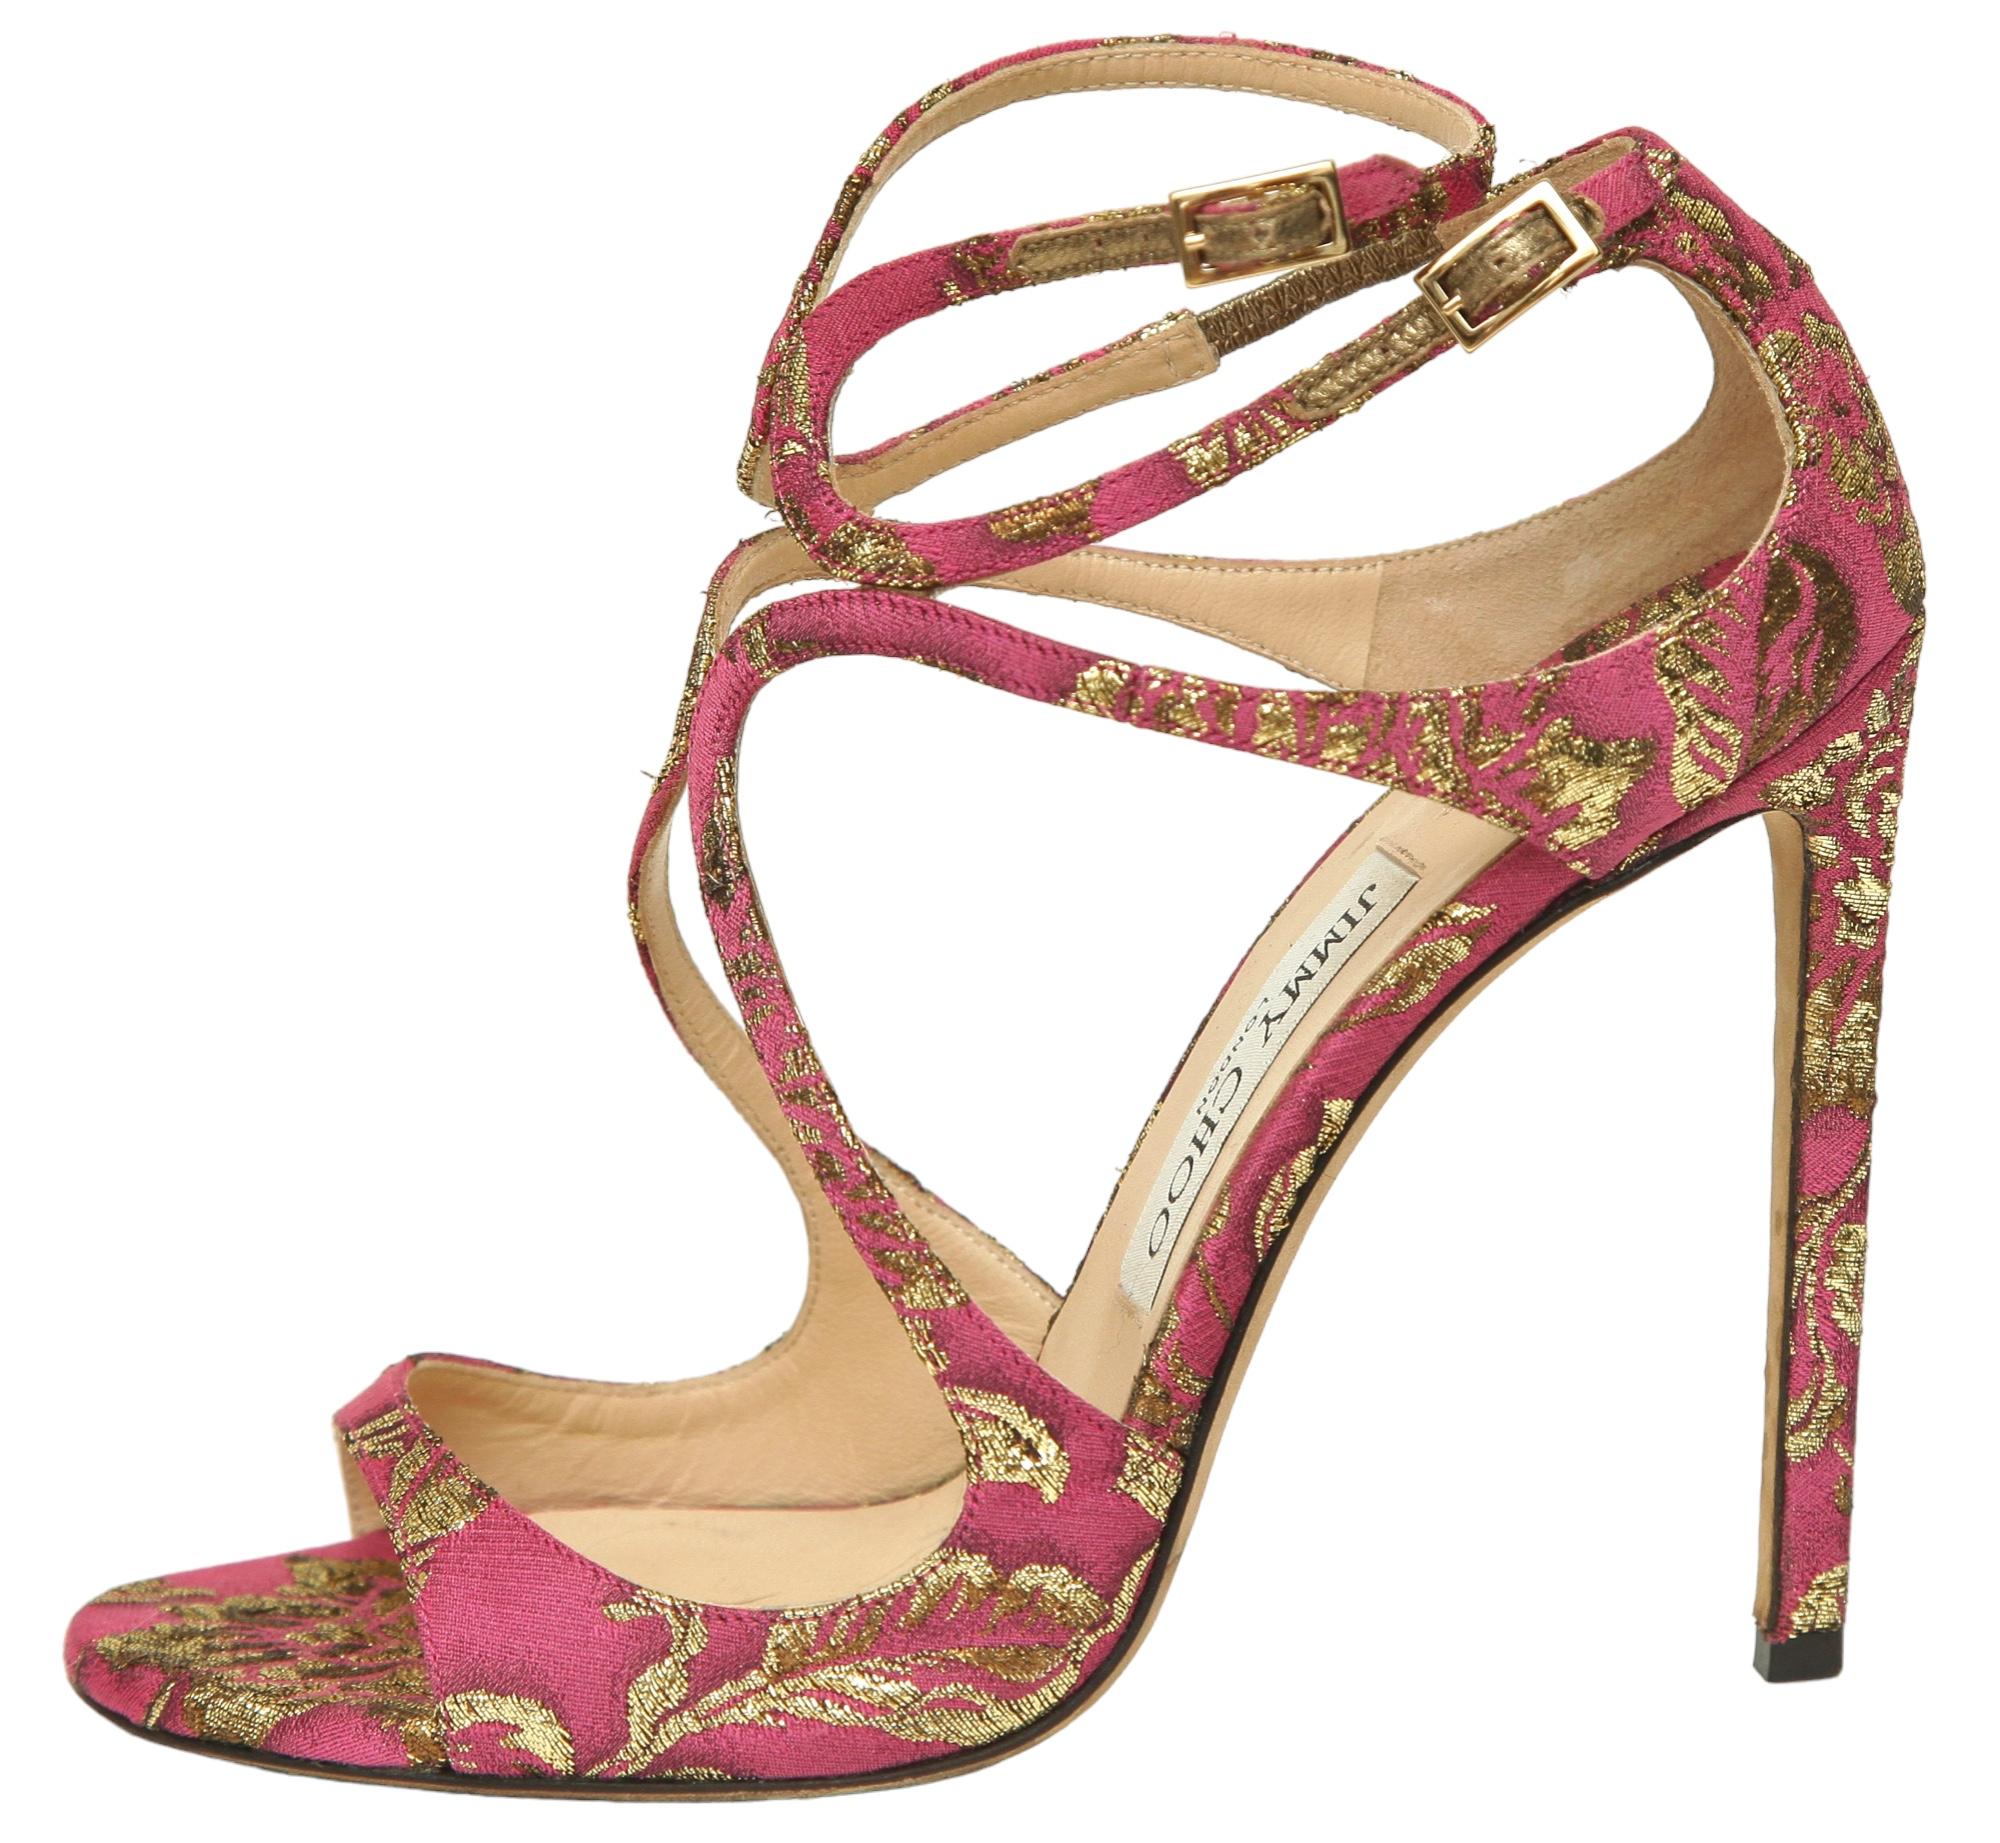 GUARANTEED AUTHENTIC JIMMY CHOO METALLIC BROCADE LANCER SANDALS

Retail excluding sales taxes $800

Details:
- Metallic pink and gold brocade uppers.
- Double ankle strap.
- Leather insole and sole.
- Comes with designer dust bag.

Size: